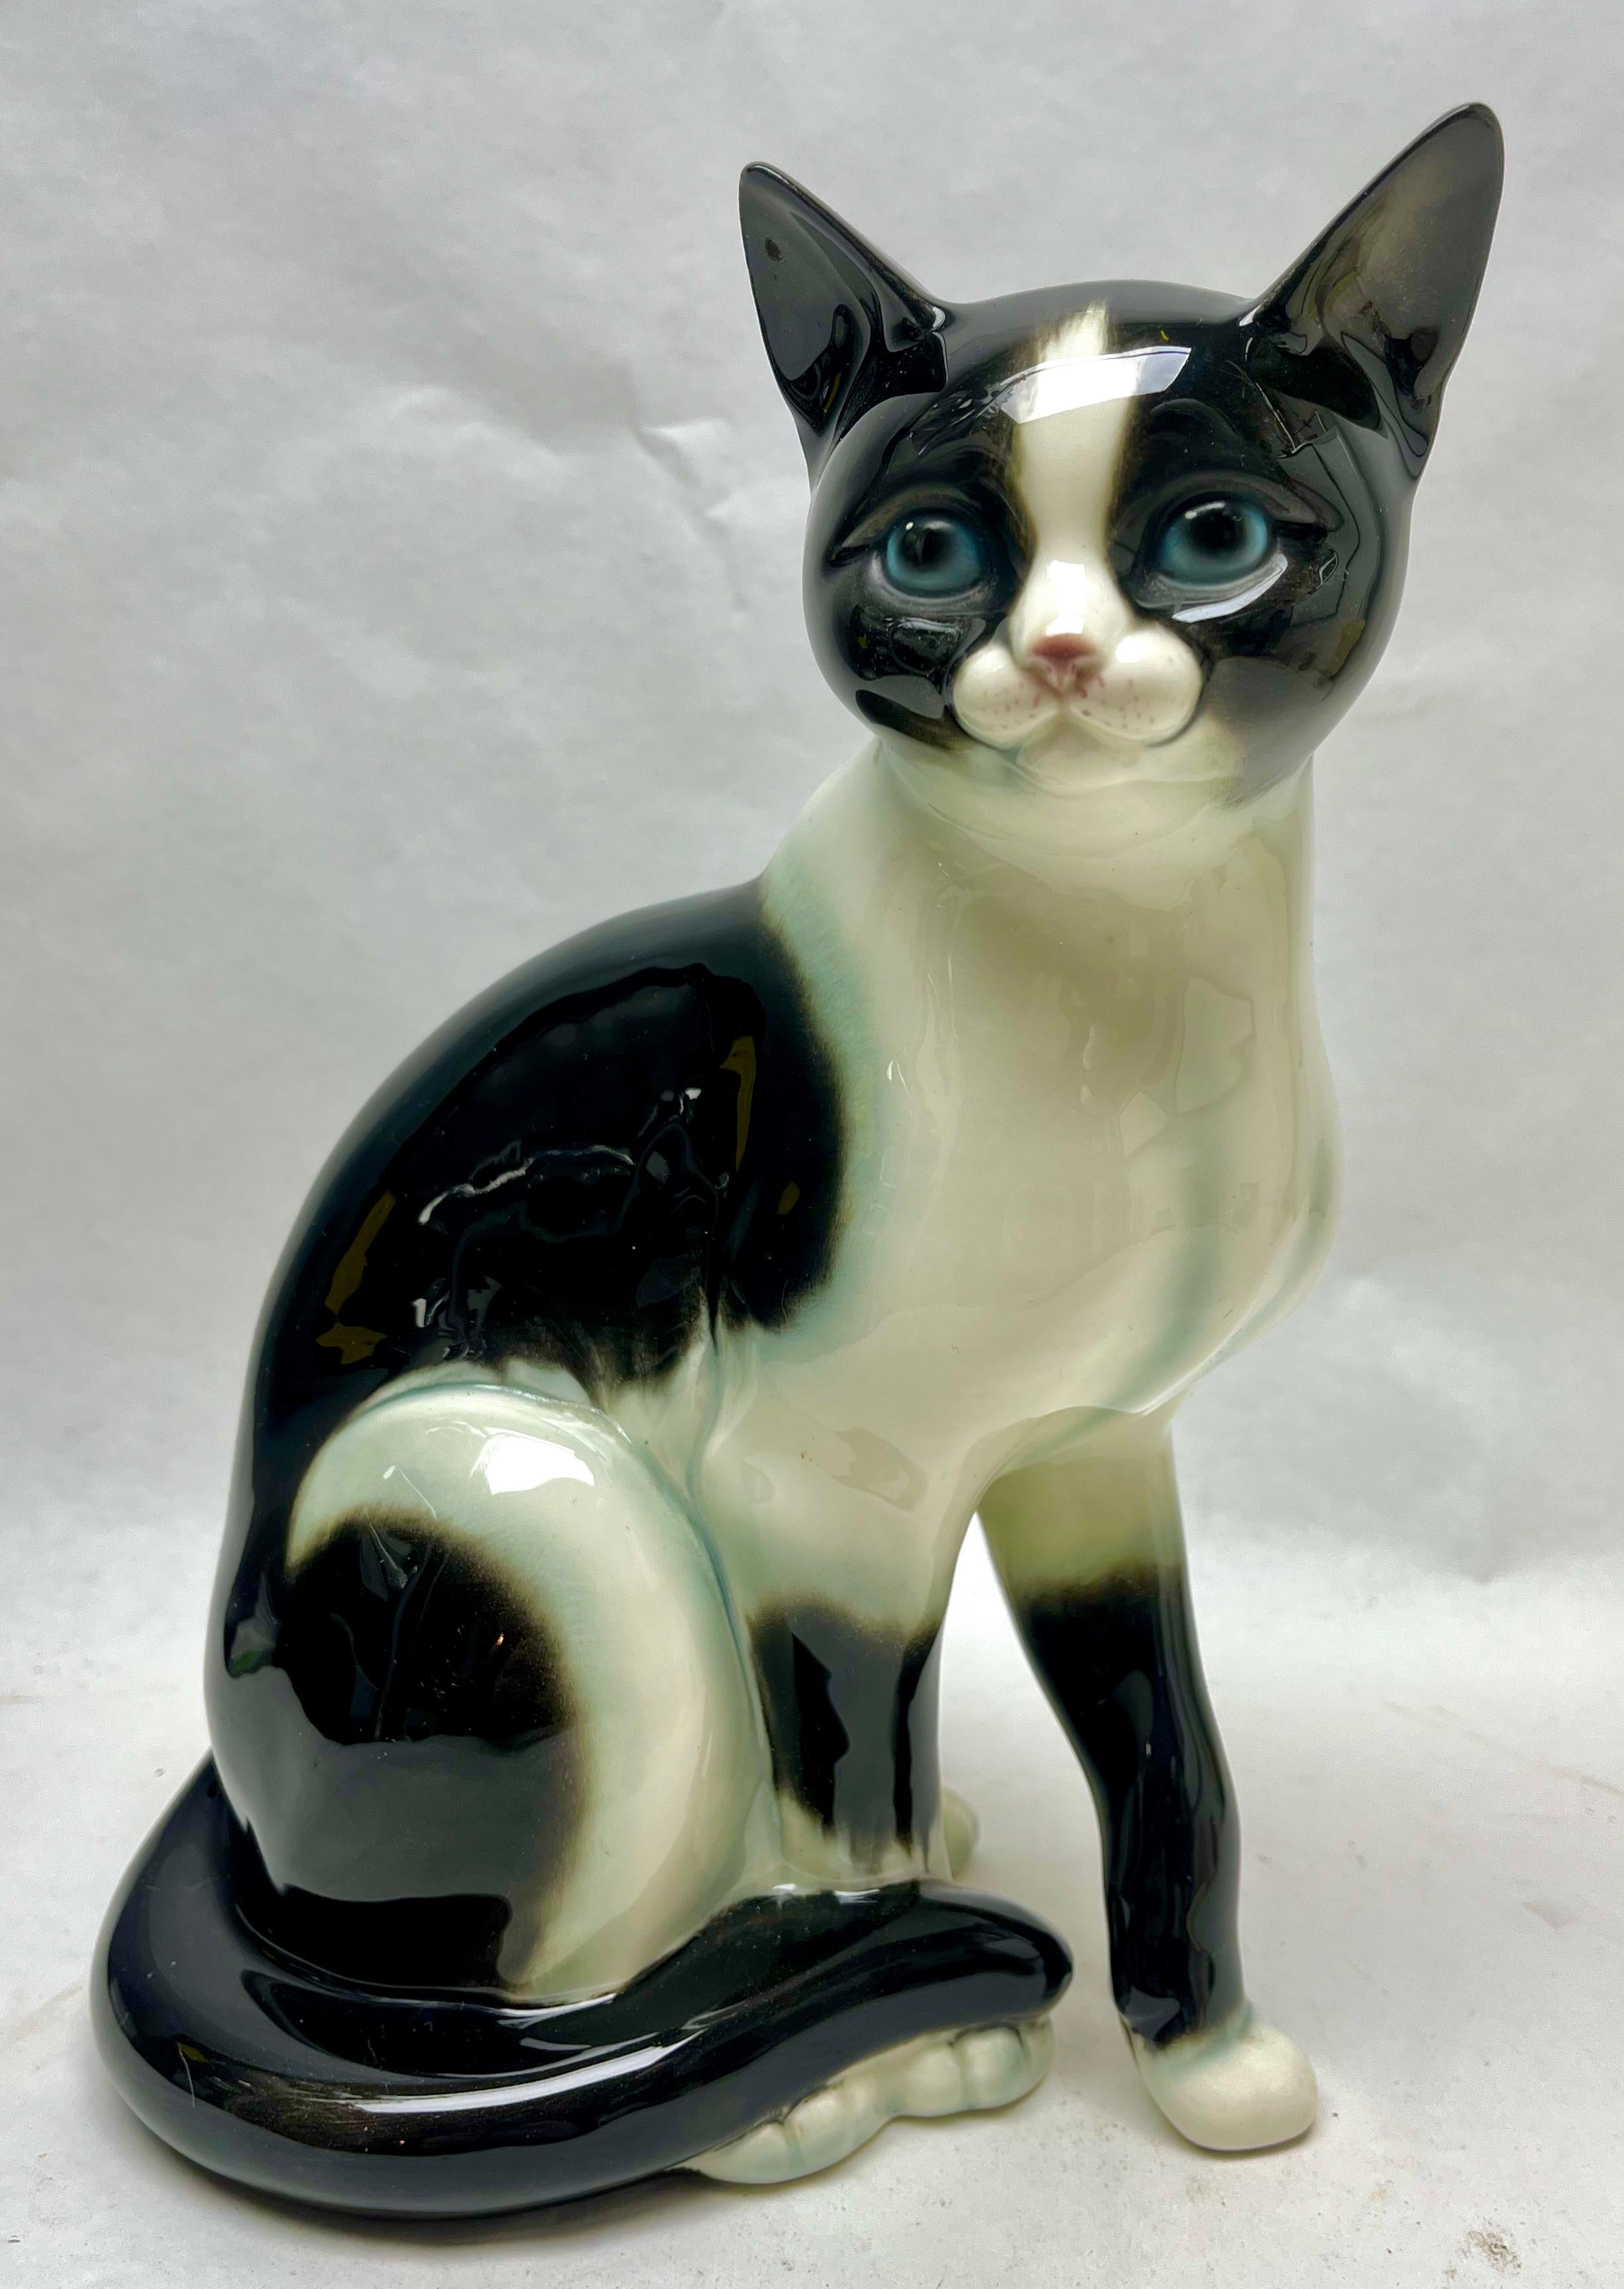 German Goebel Produced This Dramatic Porcelain Figurine Depicting Cat, circa 1960 For Sale